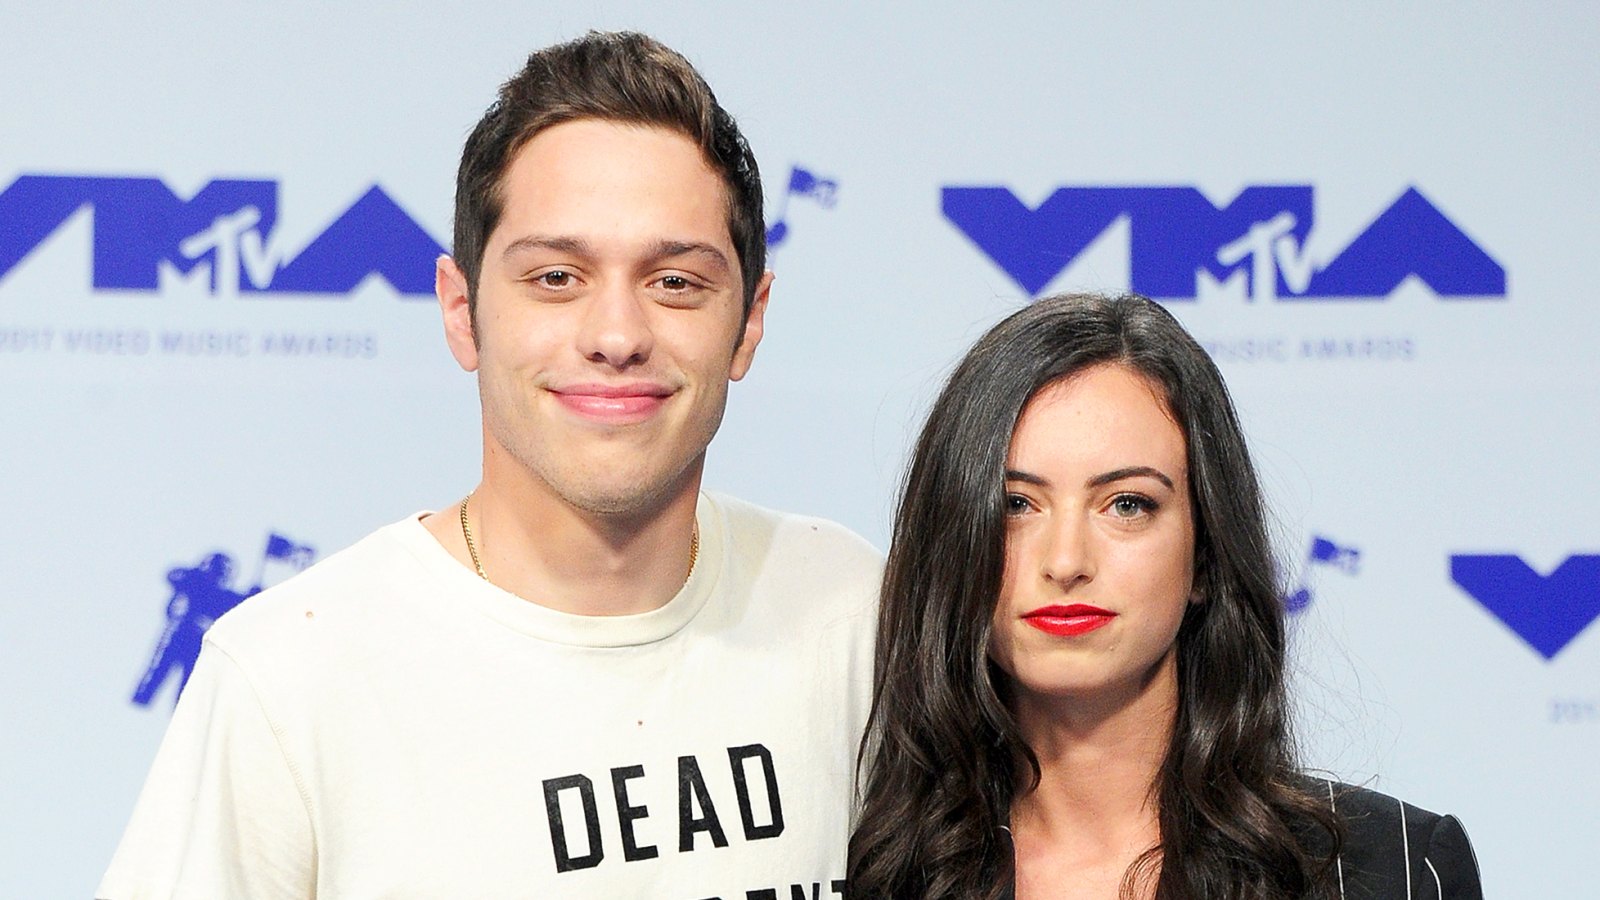 Pete Davidson and Cazzie David attend the 2017 MTV Video Music Awards at The Forum in Inglewood, California.